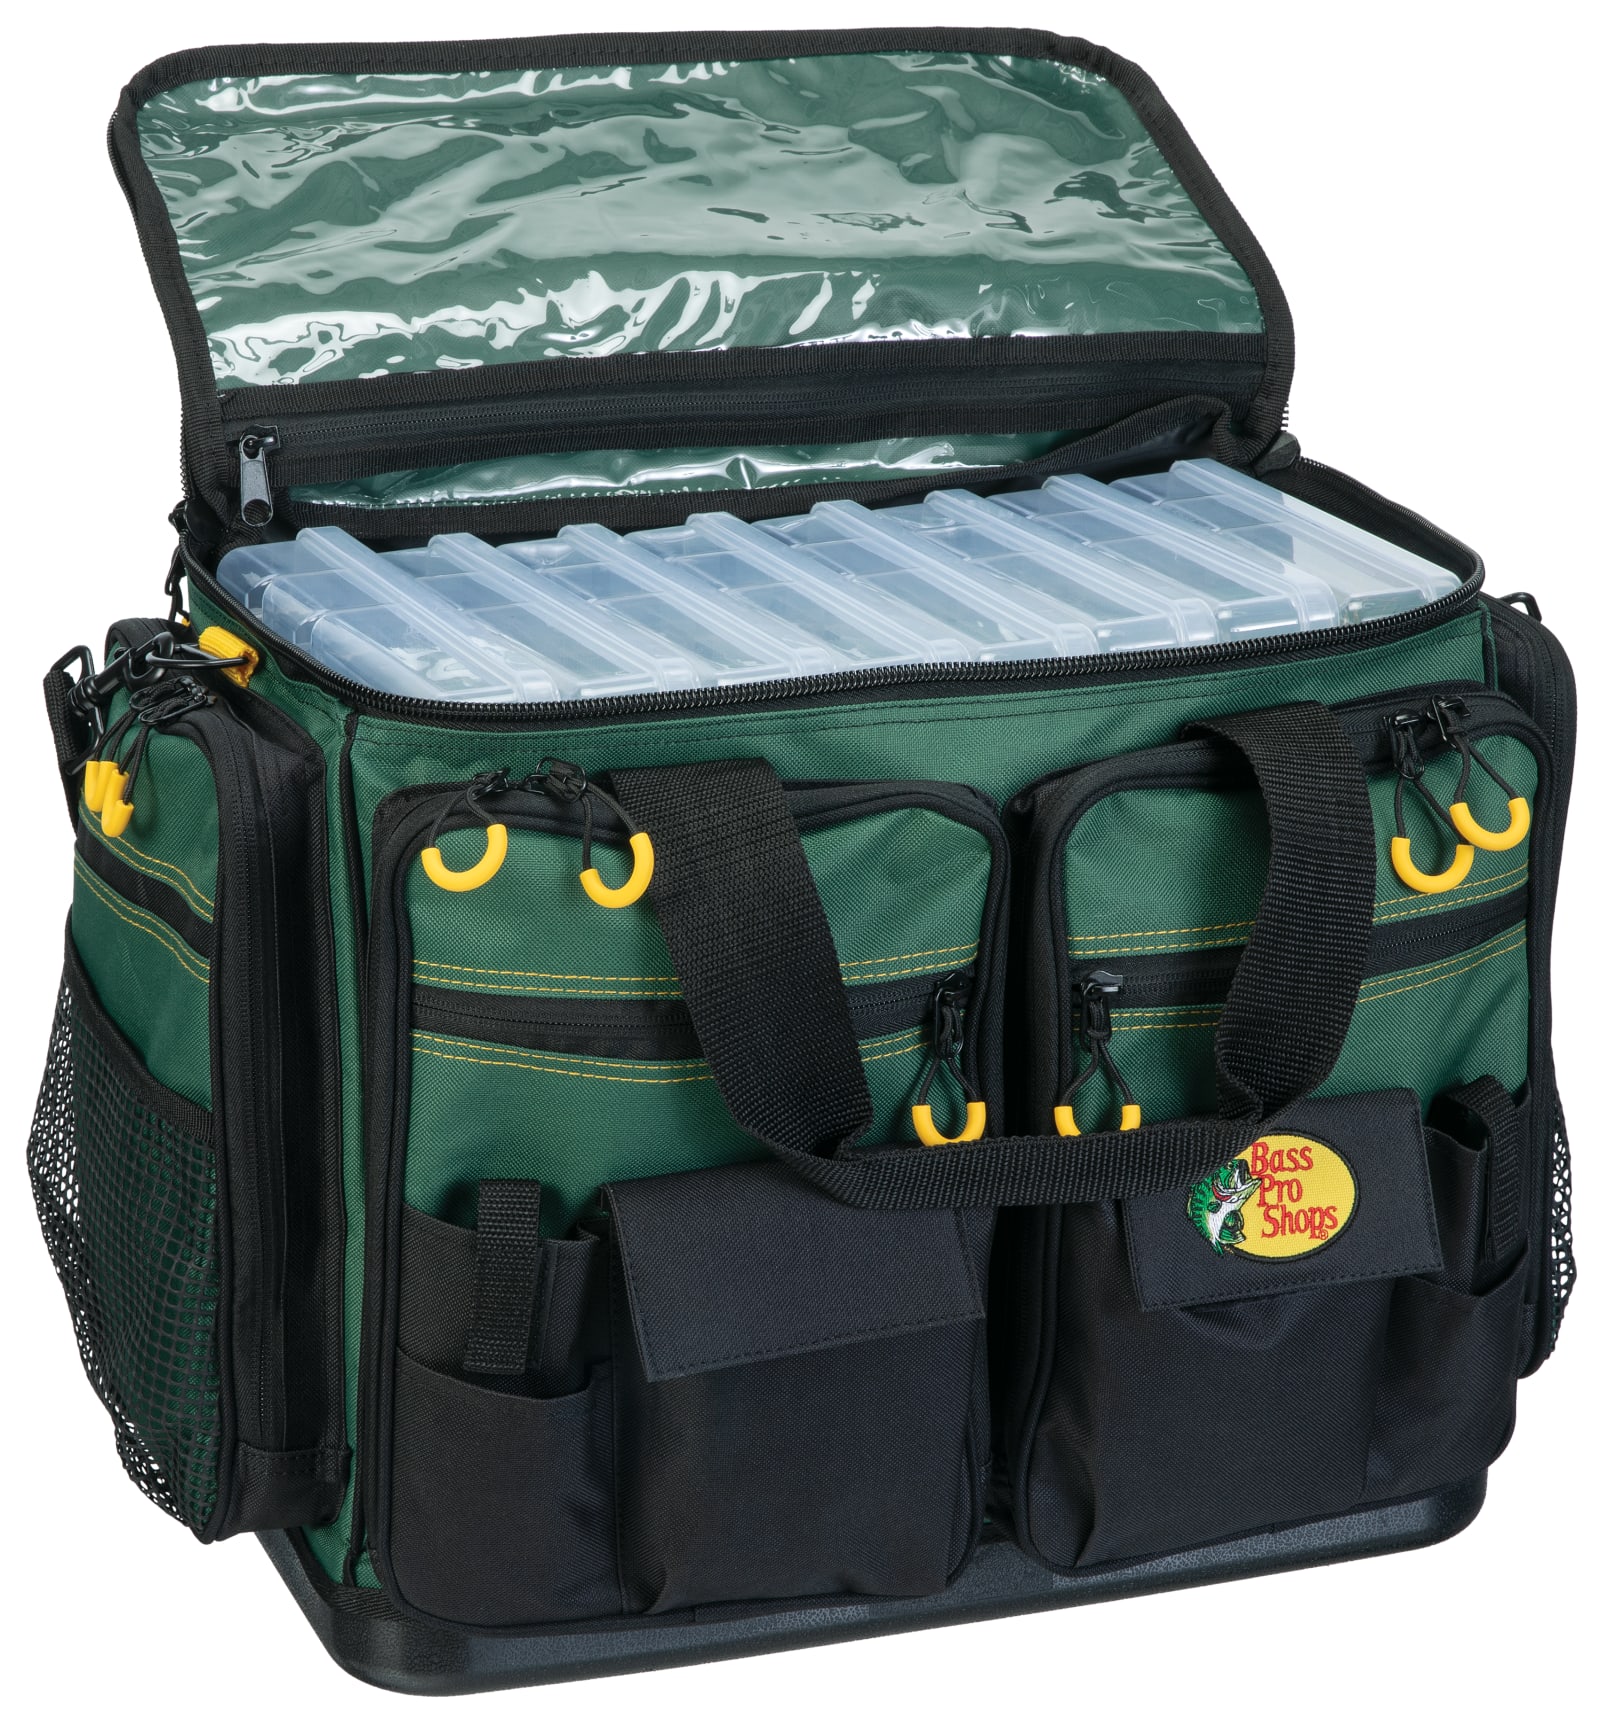 Ozark Trail Soft Sided 370 Pro Fishing Tackle Bag, 5 Tackle Boxes